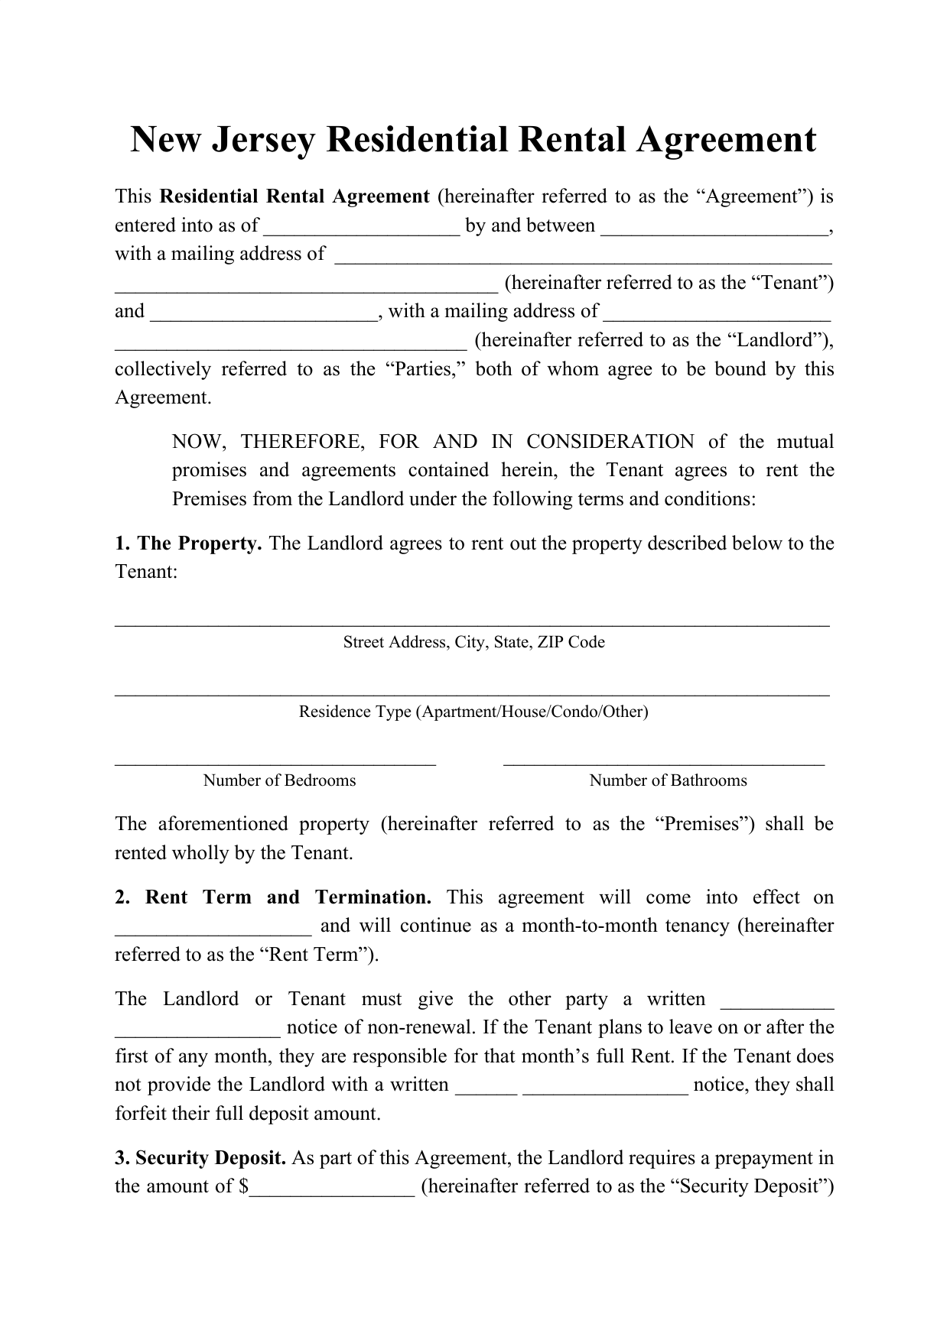 Residential Rental Agreement Template - New Jersey, Page 1